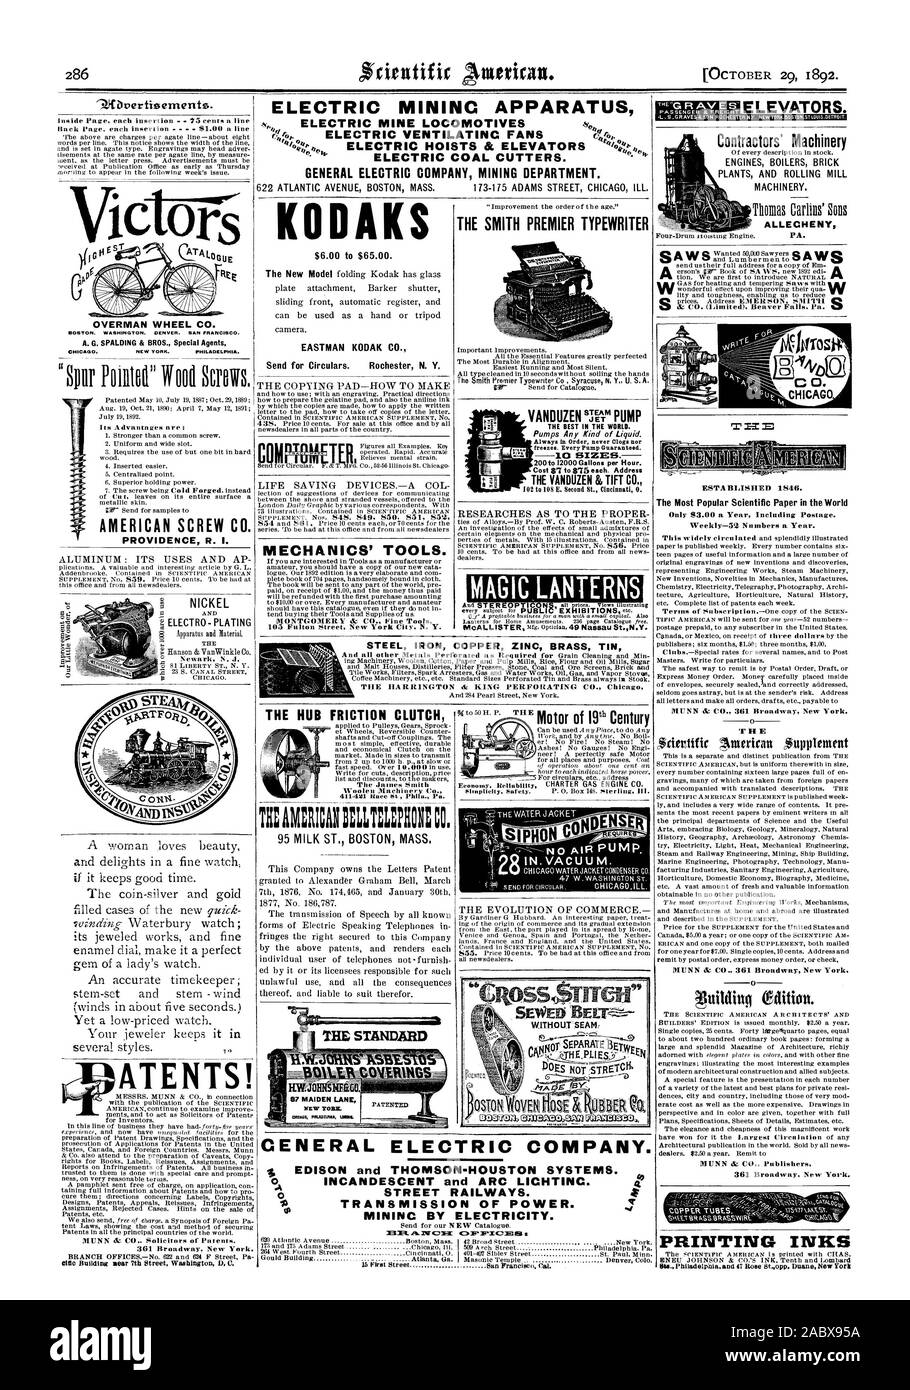 ELECTRIC MININC APPARATUS ELECTRIC MINE LOCOMOTIVES ELECTRIC COAL CUTTERS. GENERAL ELECTRIC COMPANY MINING DEPARTMENT. KODAKS Send for Circulars. Rochester N. V. MECHANICS' TOOLS. THE SMITH PREMIER TYPEWRITER MAGIC.LANTERNS A S P THE BEST IN THE WORLD. Always in Order never Clogs nor freezes. Every Pump Guaranteed. 10 SIZES. Cost $7 to $75 each. Address 102 to 108 E. Second St. Cincinnati 0. STEEL IRON COPPER ZINC BRASS TIN THE HARRINGTON & KING PERFORATING CO. Chicag ATENTS! THE HUB FRICTION CLUTCH 0 4-491 Race Phila. Pa. Motor of 19th Century AMERICAN SCREW CO. PROVIDENCE R. I. NICKEL Stock Photo